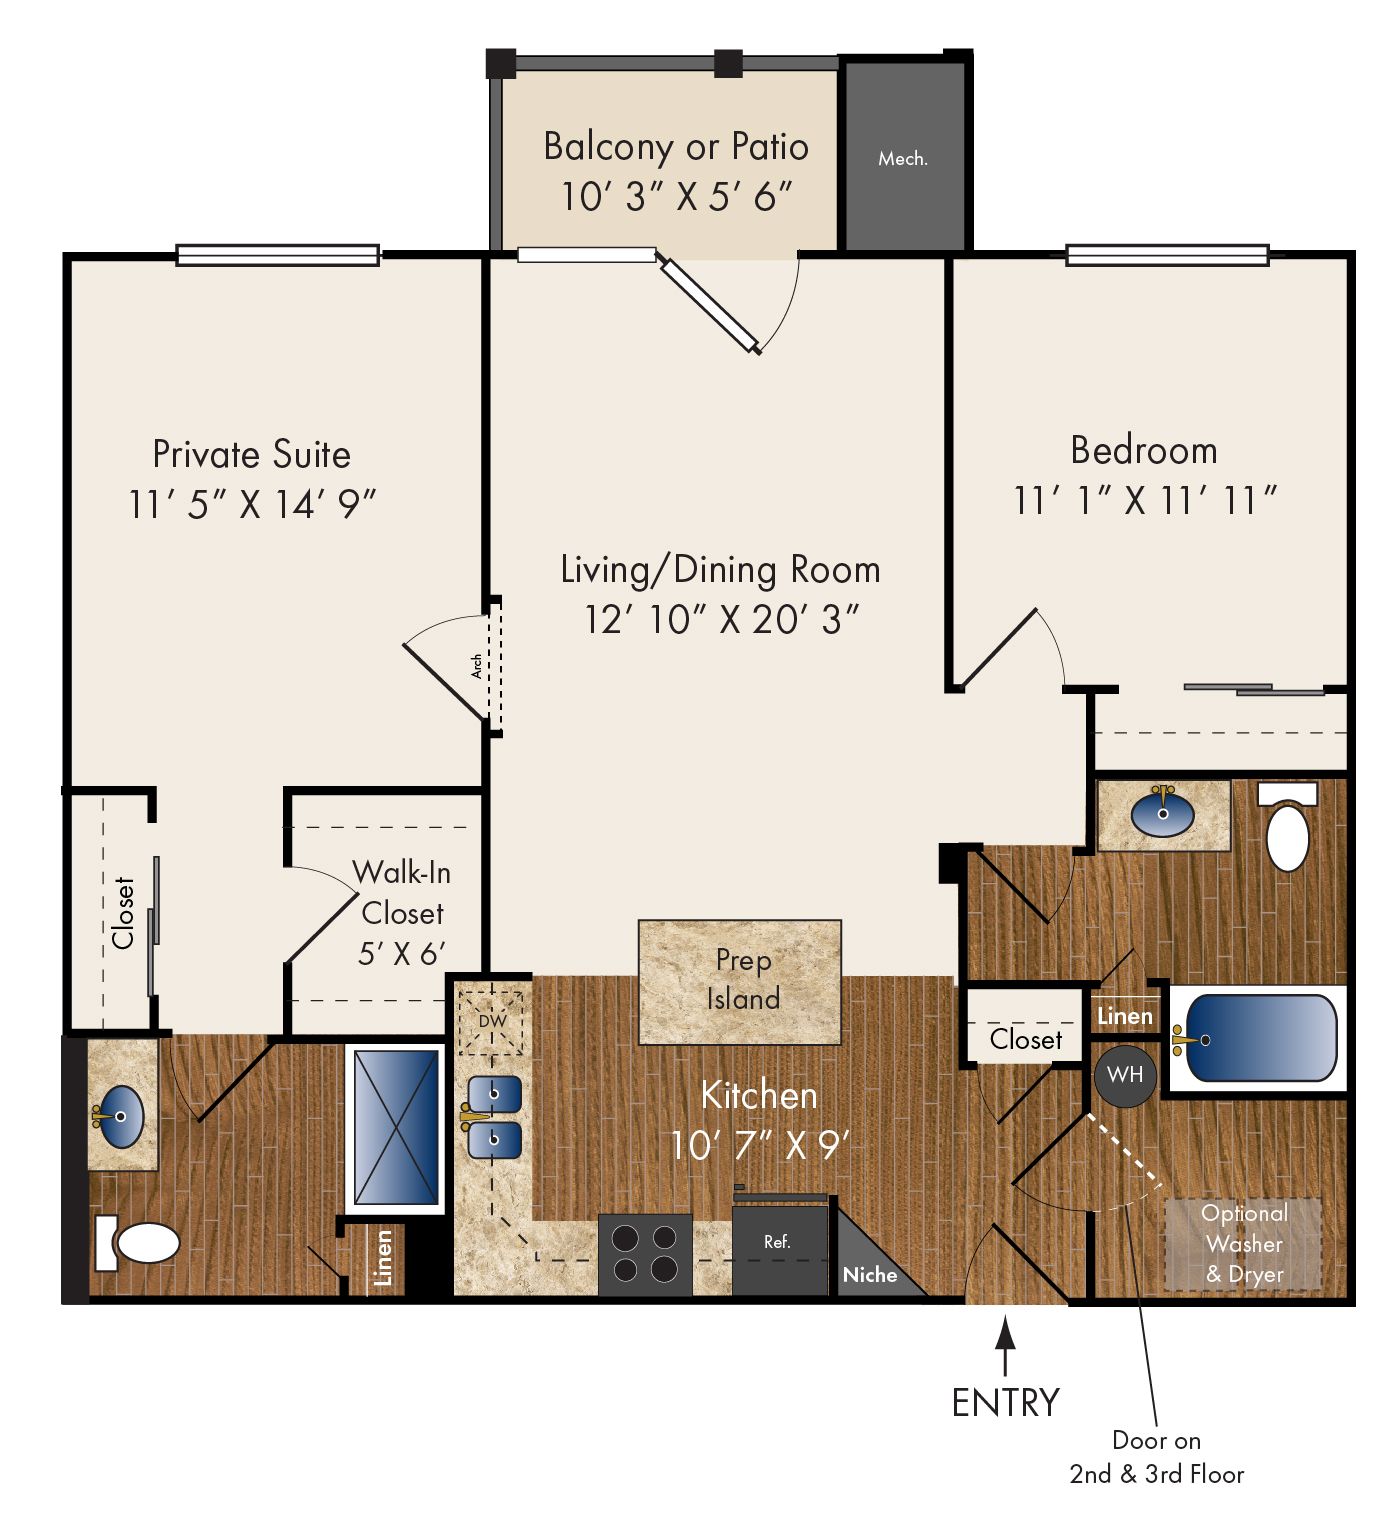 "Byron" Two Bedroom 1121 sq. ft. Luxury townhomes, Entry